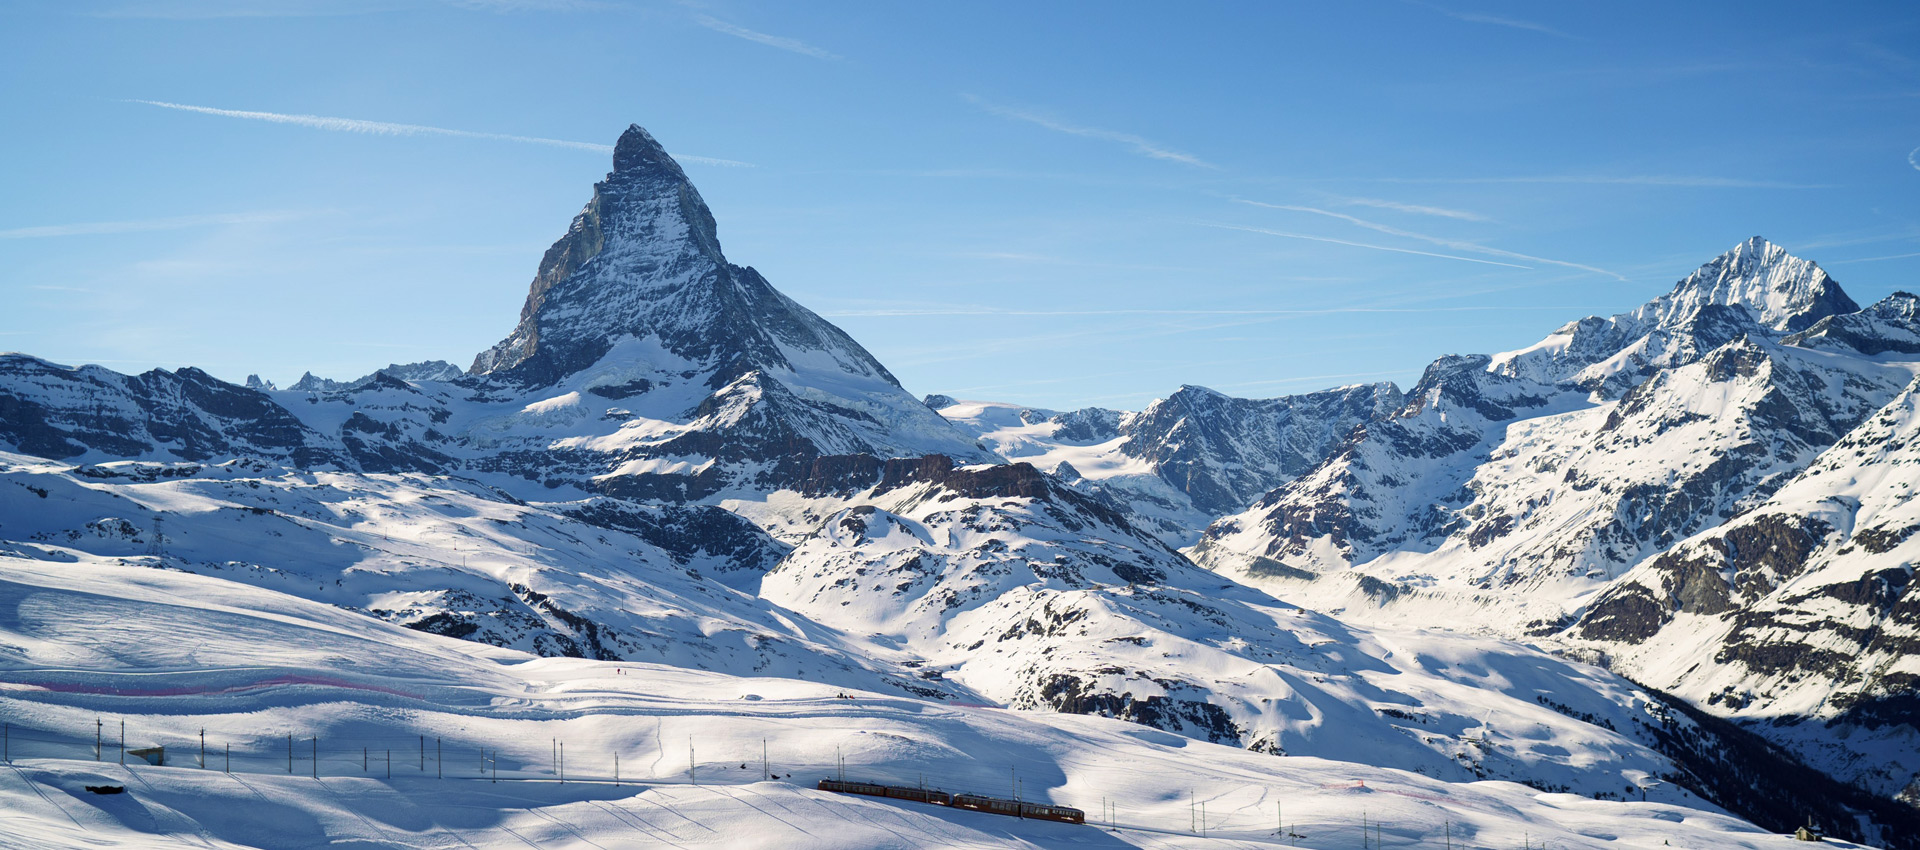 Nestled in a valley beneath the iconic Matterhorn peak, Zermatt is the highest and also probably one of Switzerland’s most famous resorts.